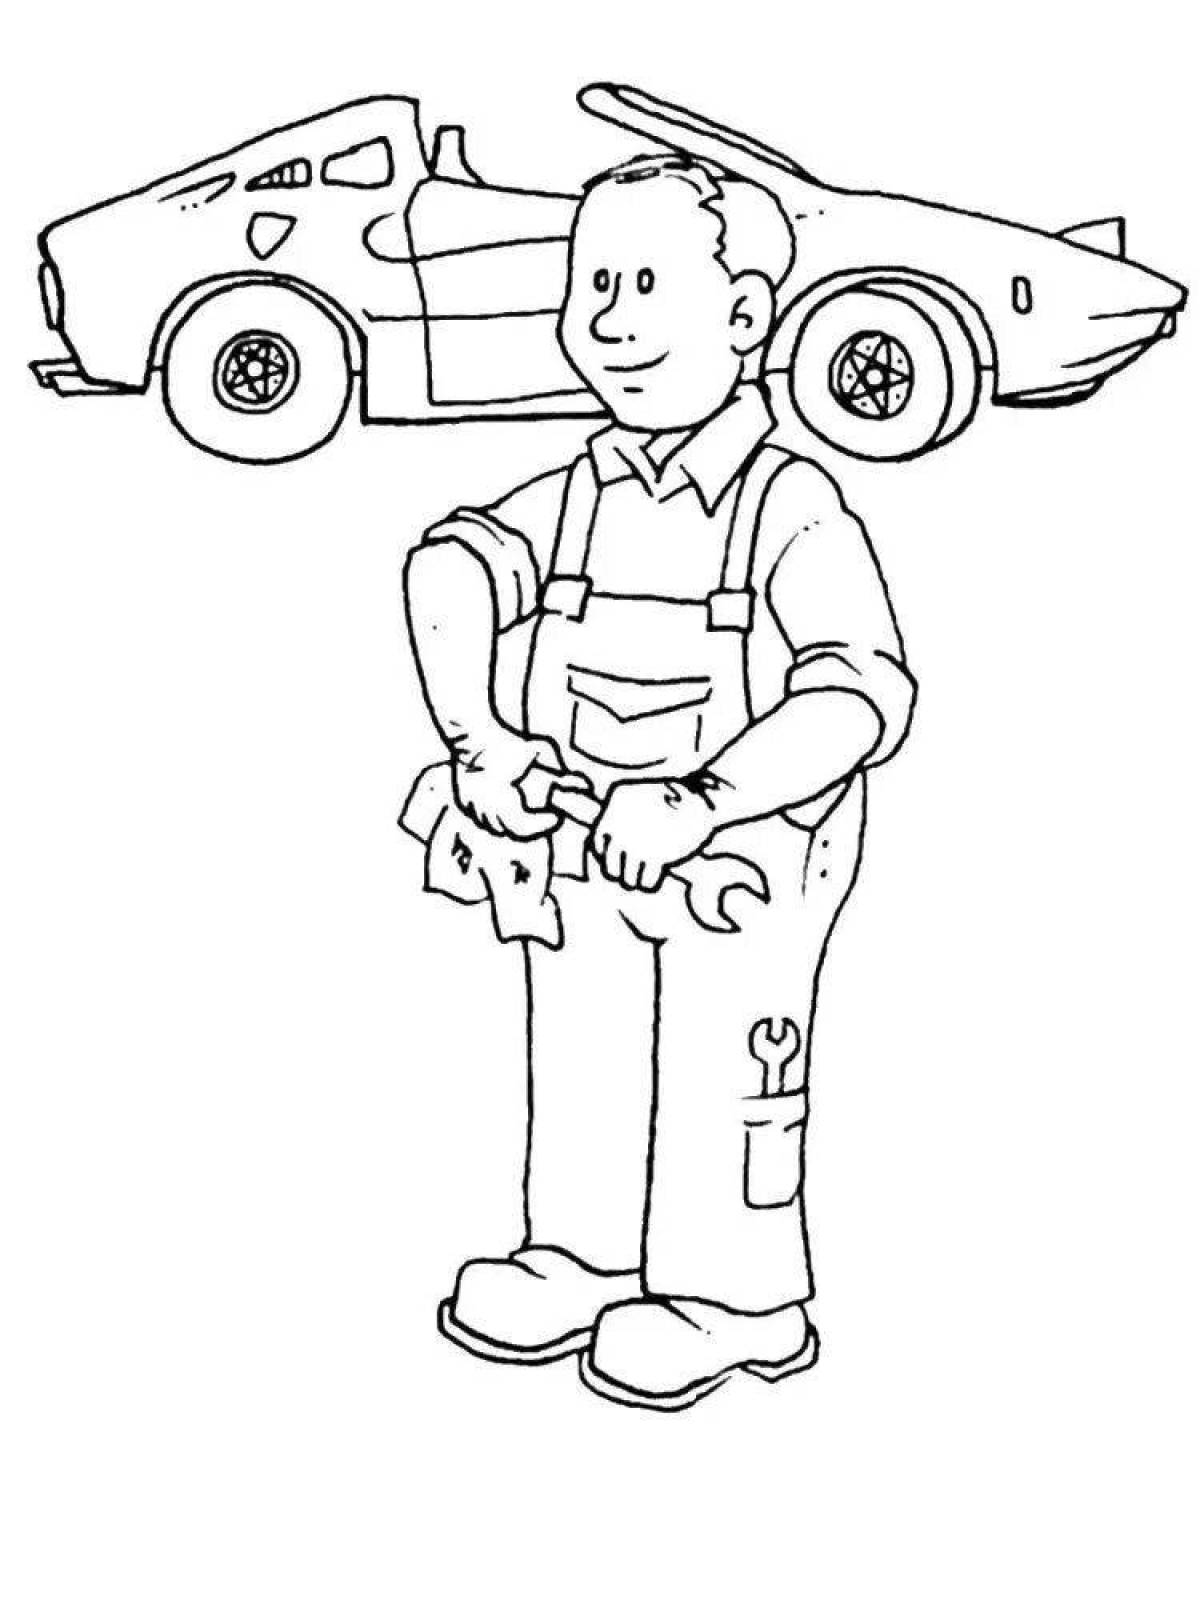 Attractive mechanic coloring